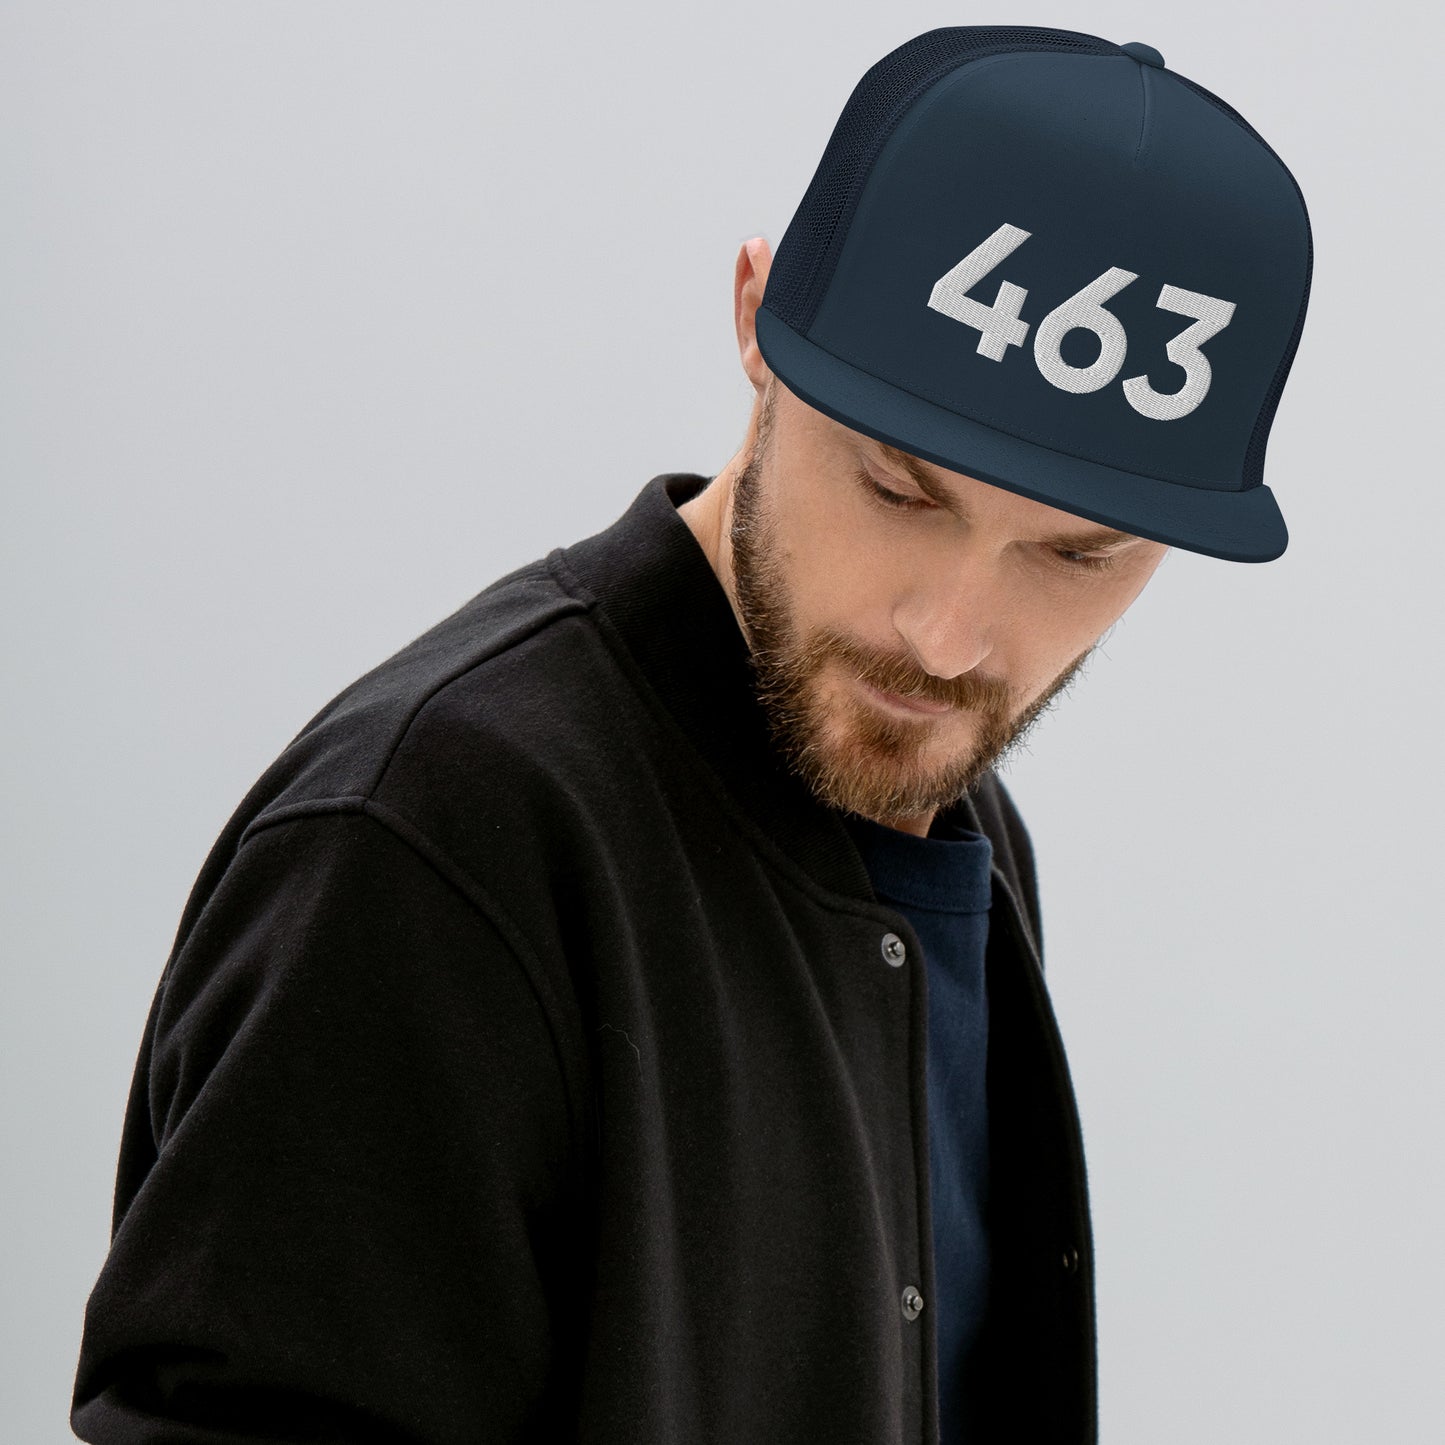 463 Indy Strong Trucker Hat